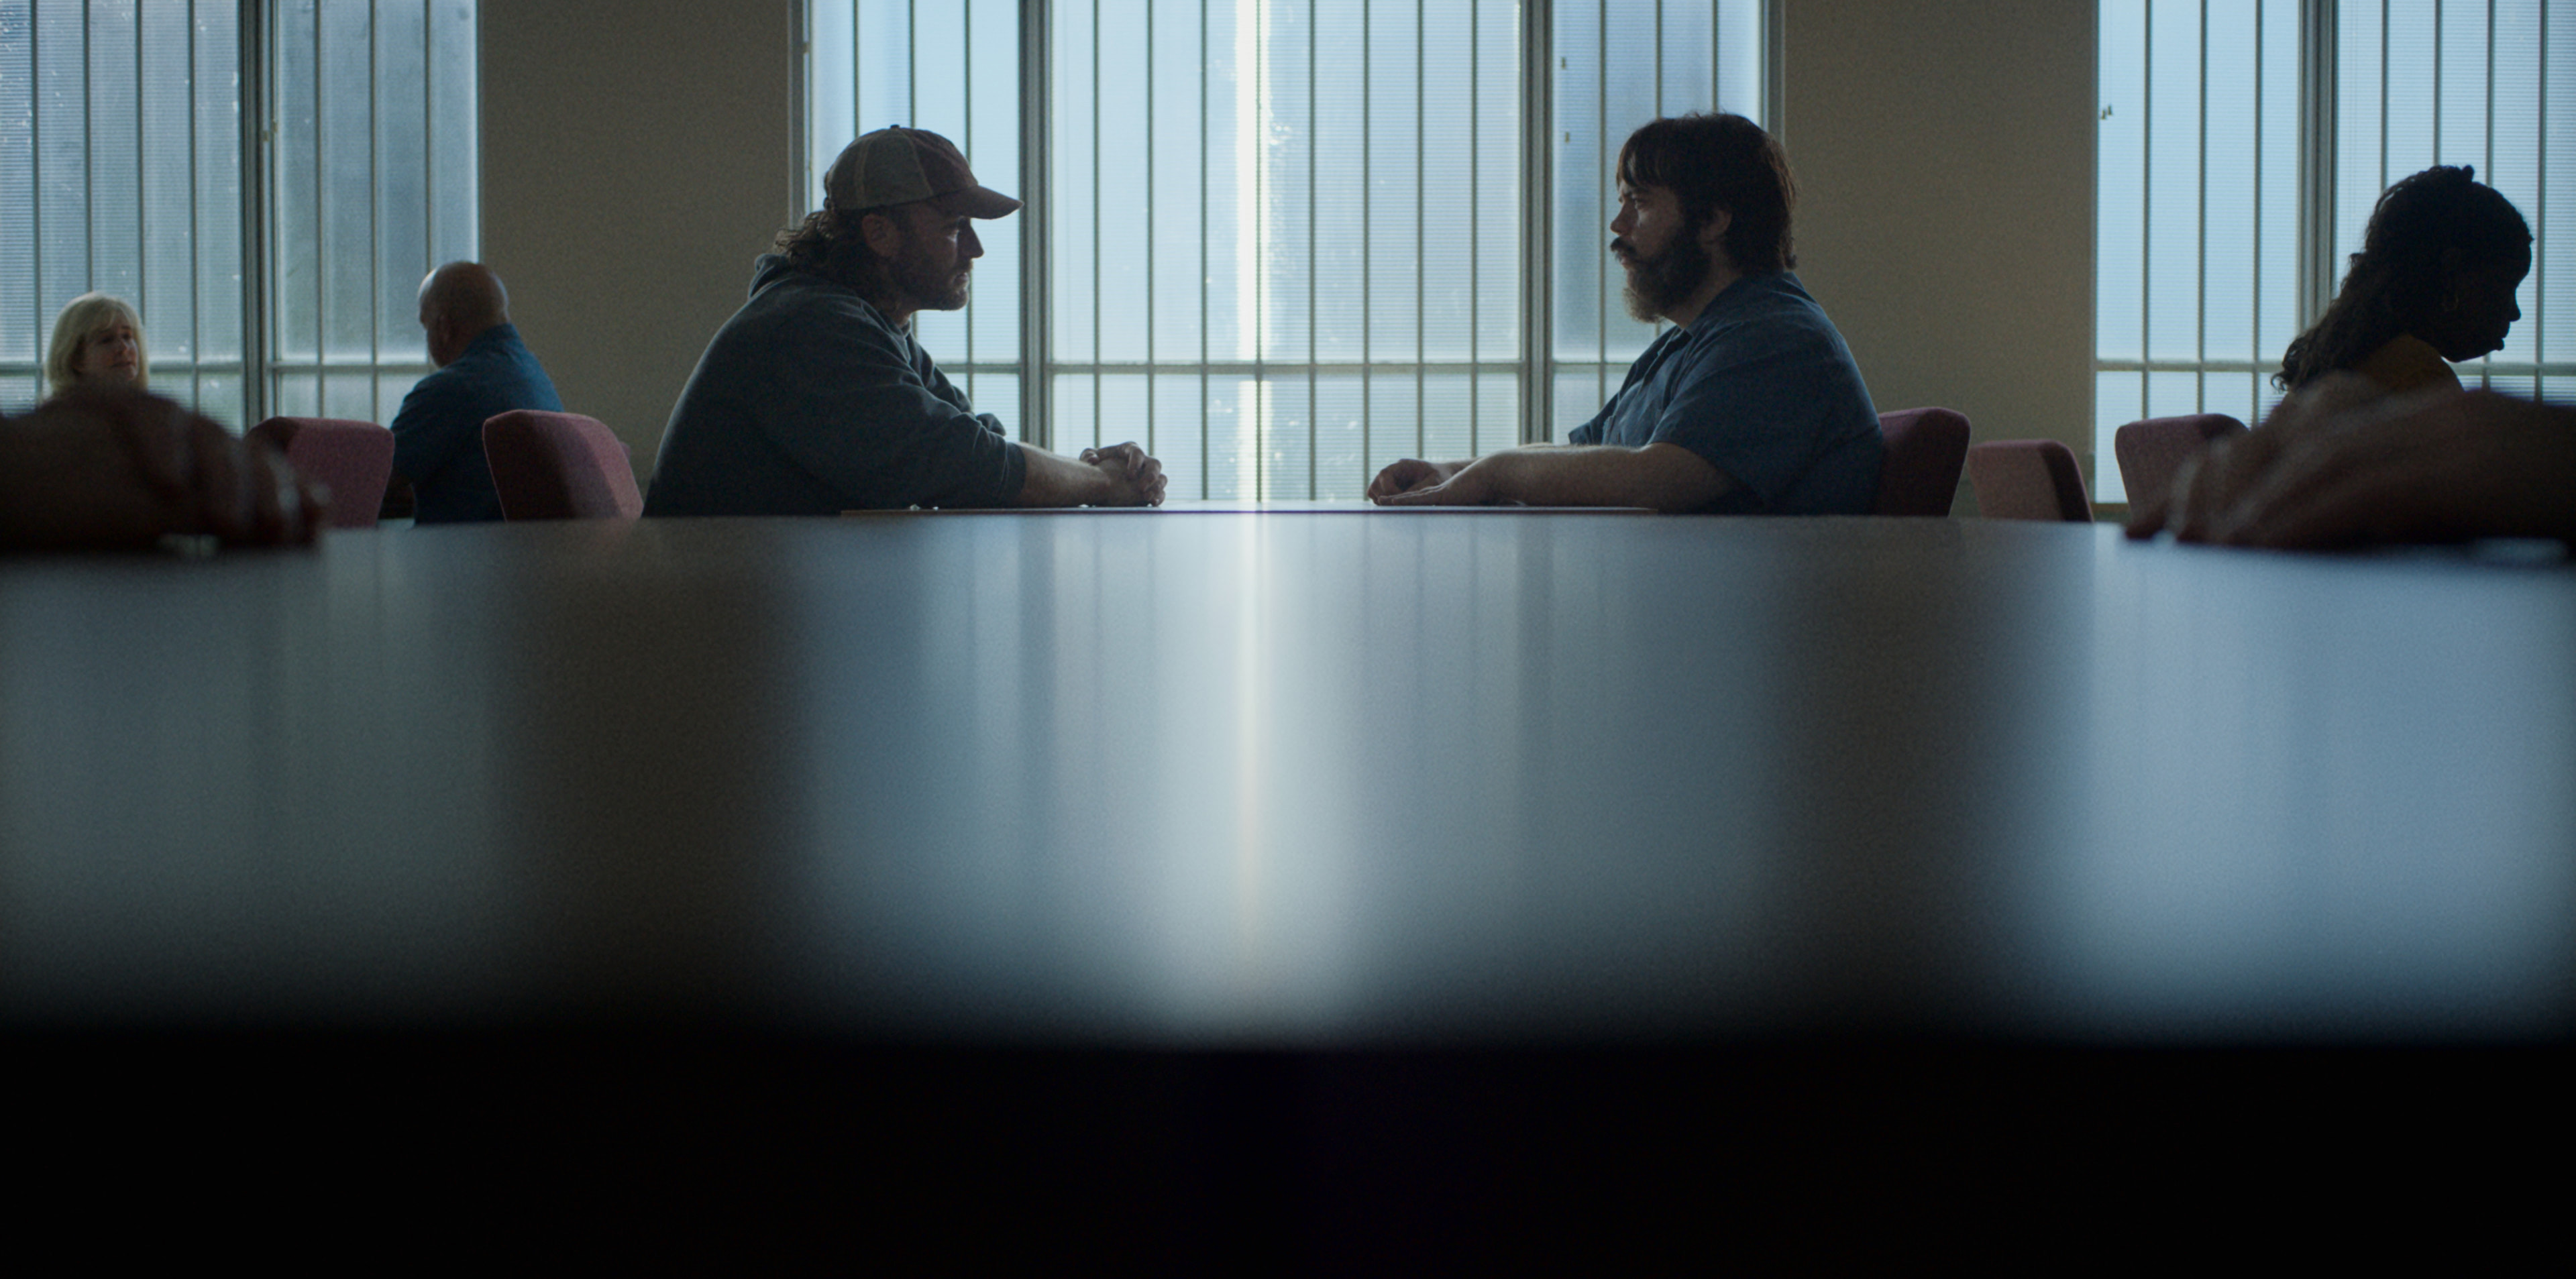 Jake McLaughlin as Gary Hall and Paul Walter Hauser as Larry Hall in episode 4 of “Black Bird.” Cr: Apple TV+